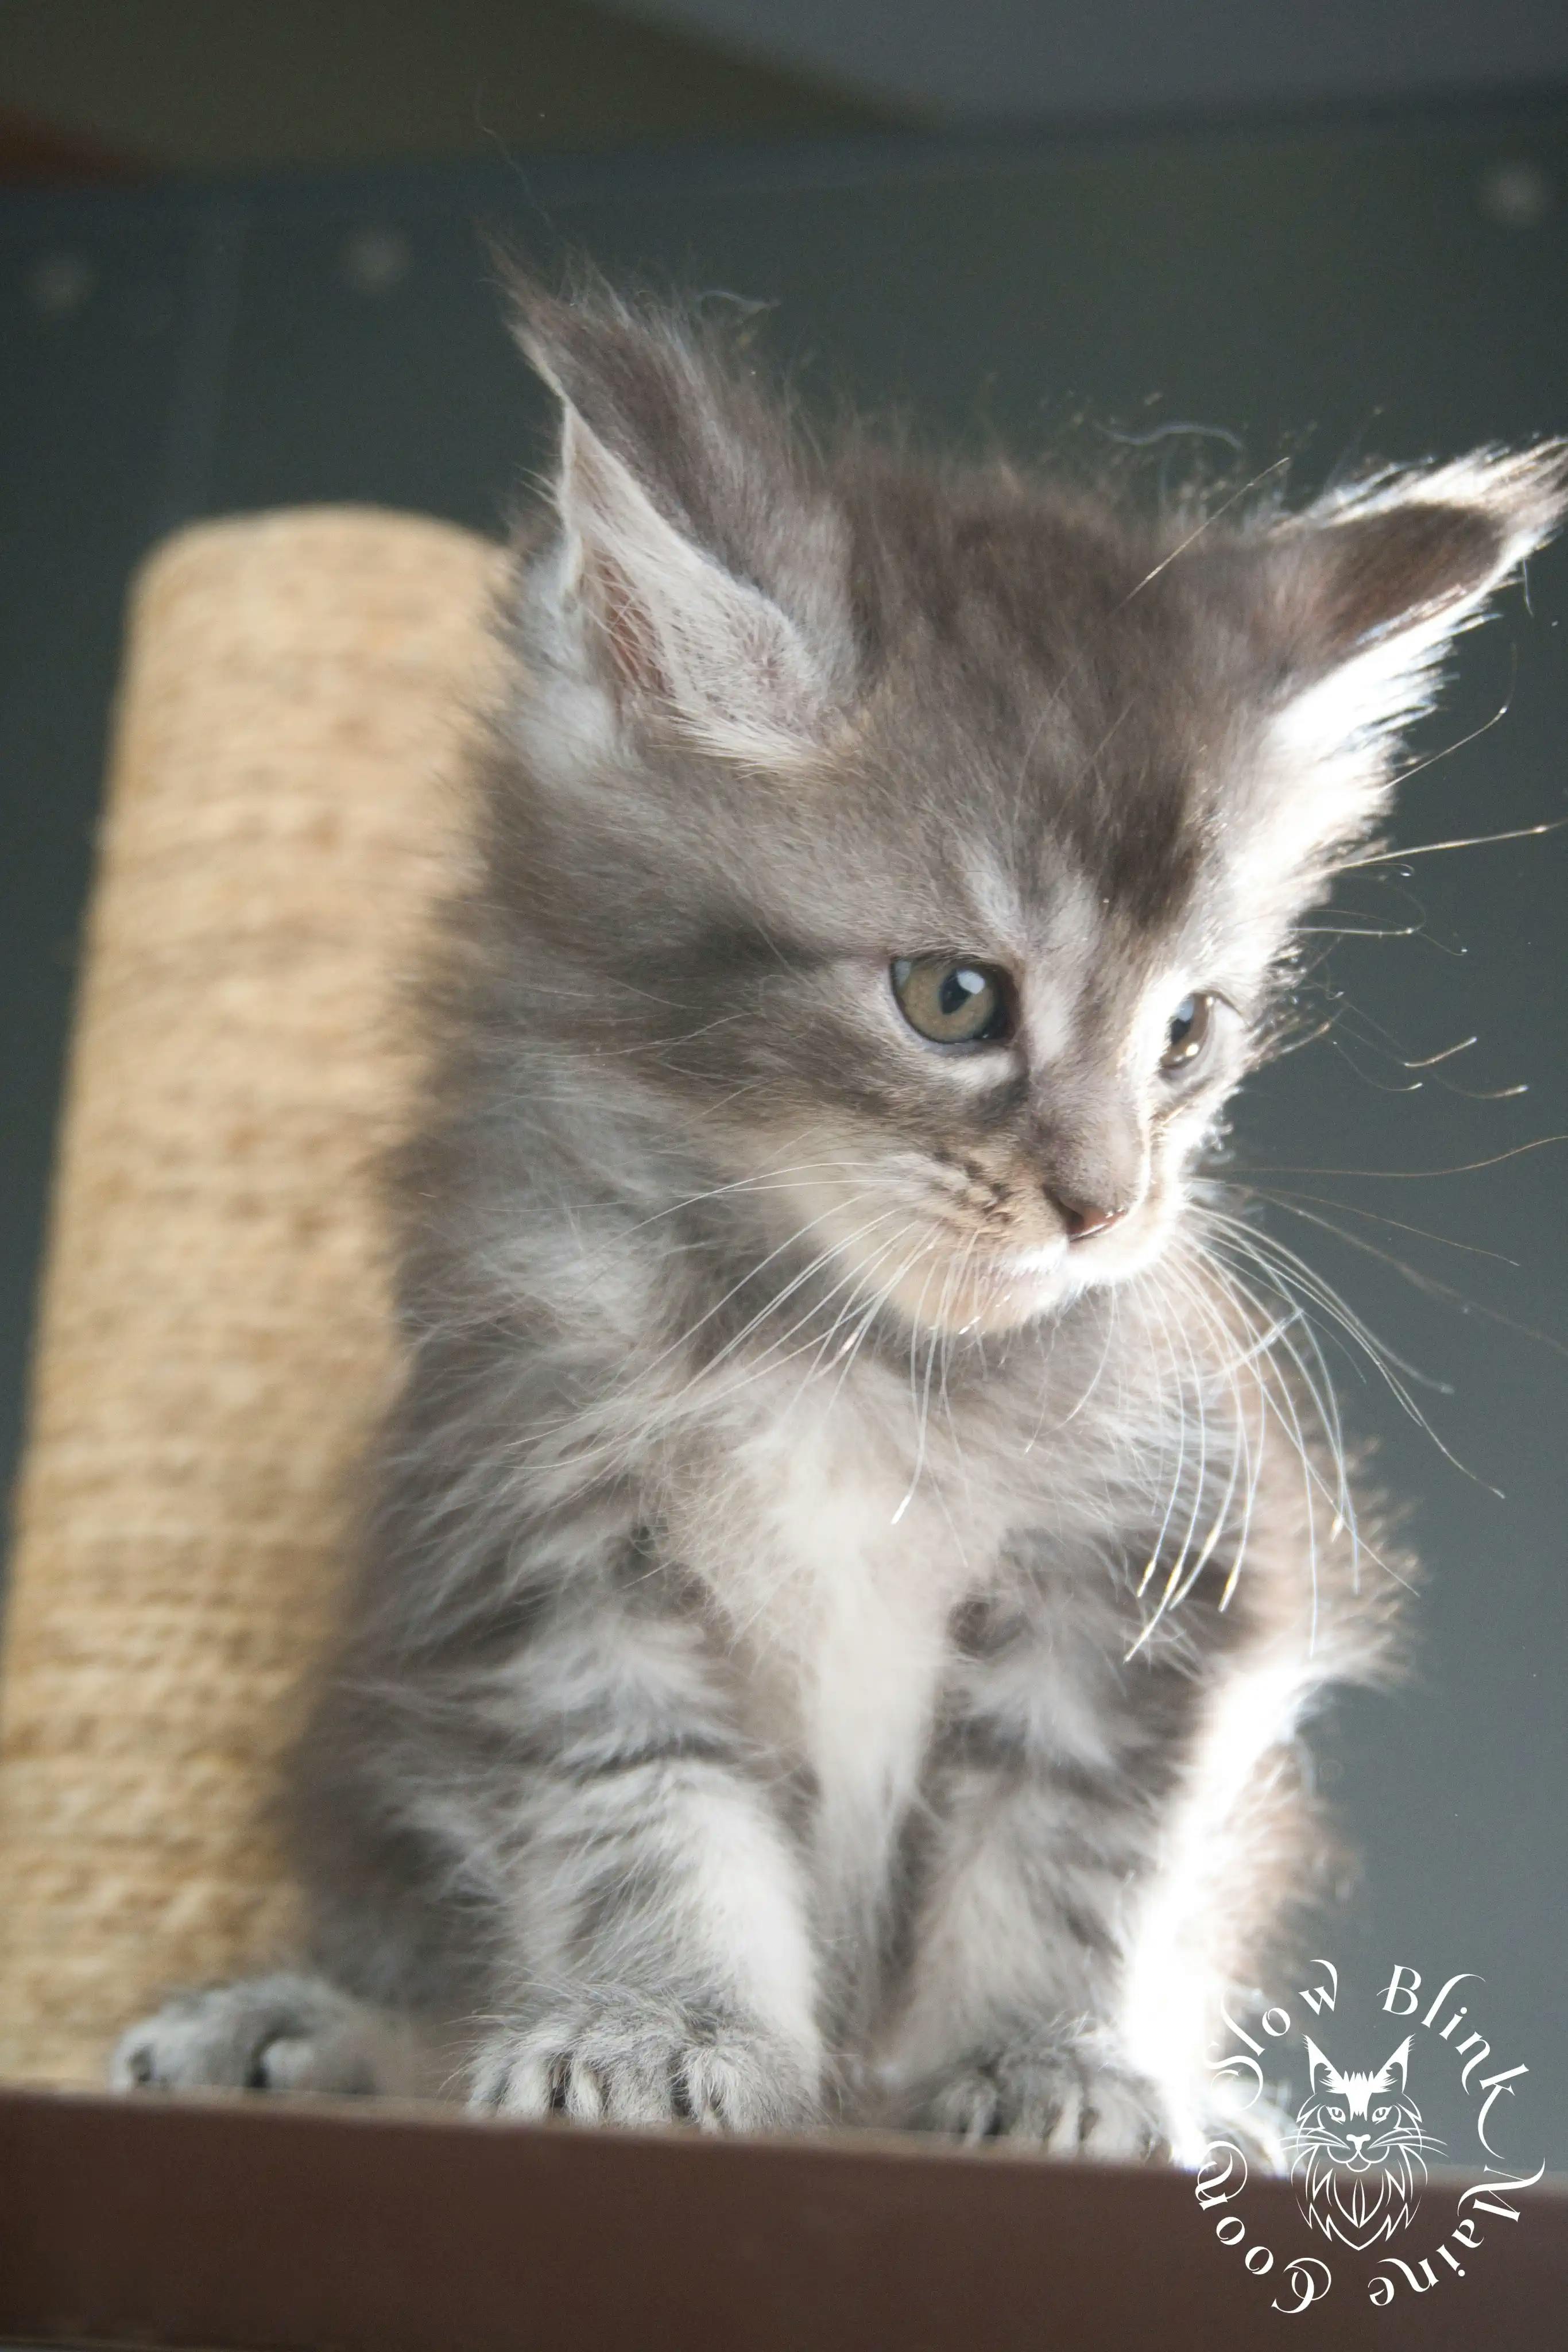 Blue Silver Tabby Maine Coon Kittens > blue silver tabby maine coon kitten | slowblinkmainecoons | 310